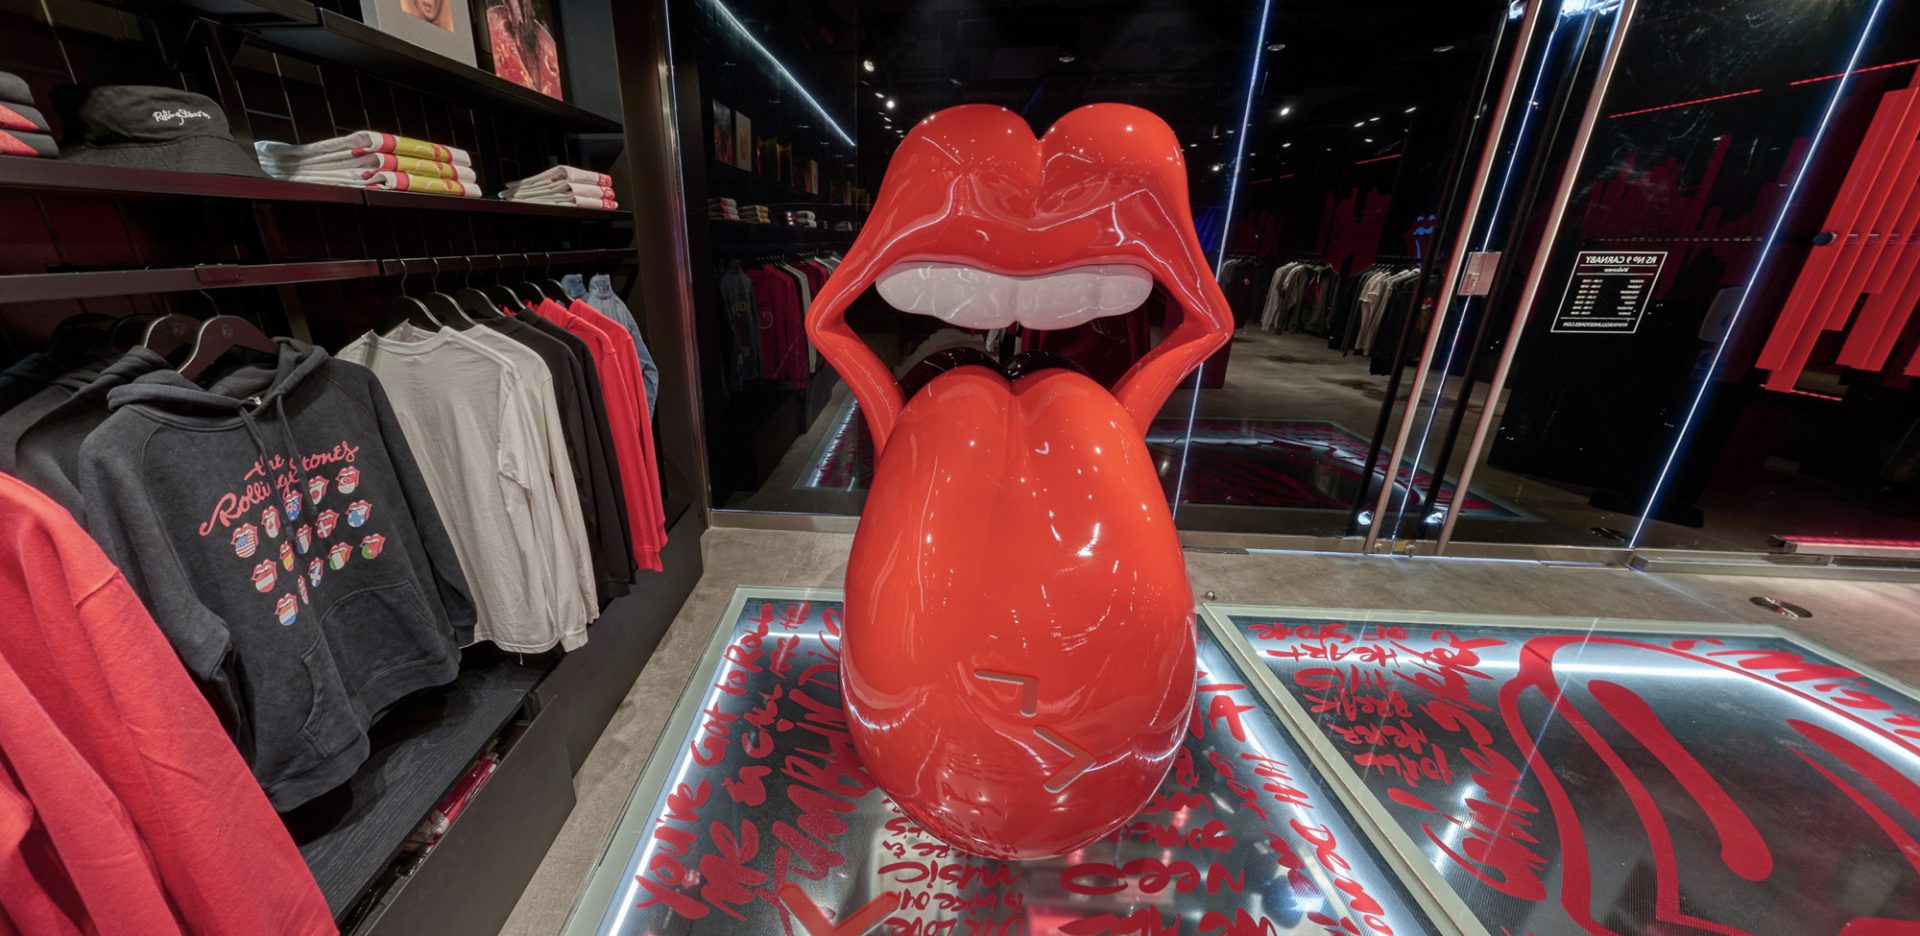 Rolling stones virtual shopping experience